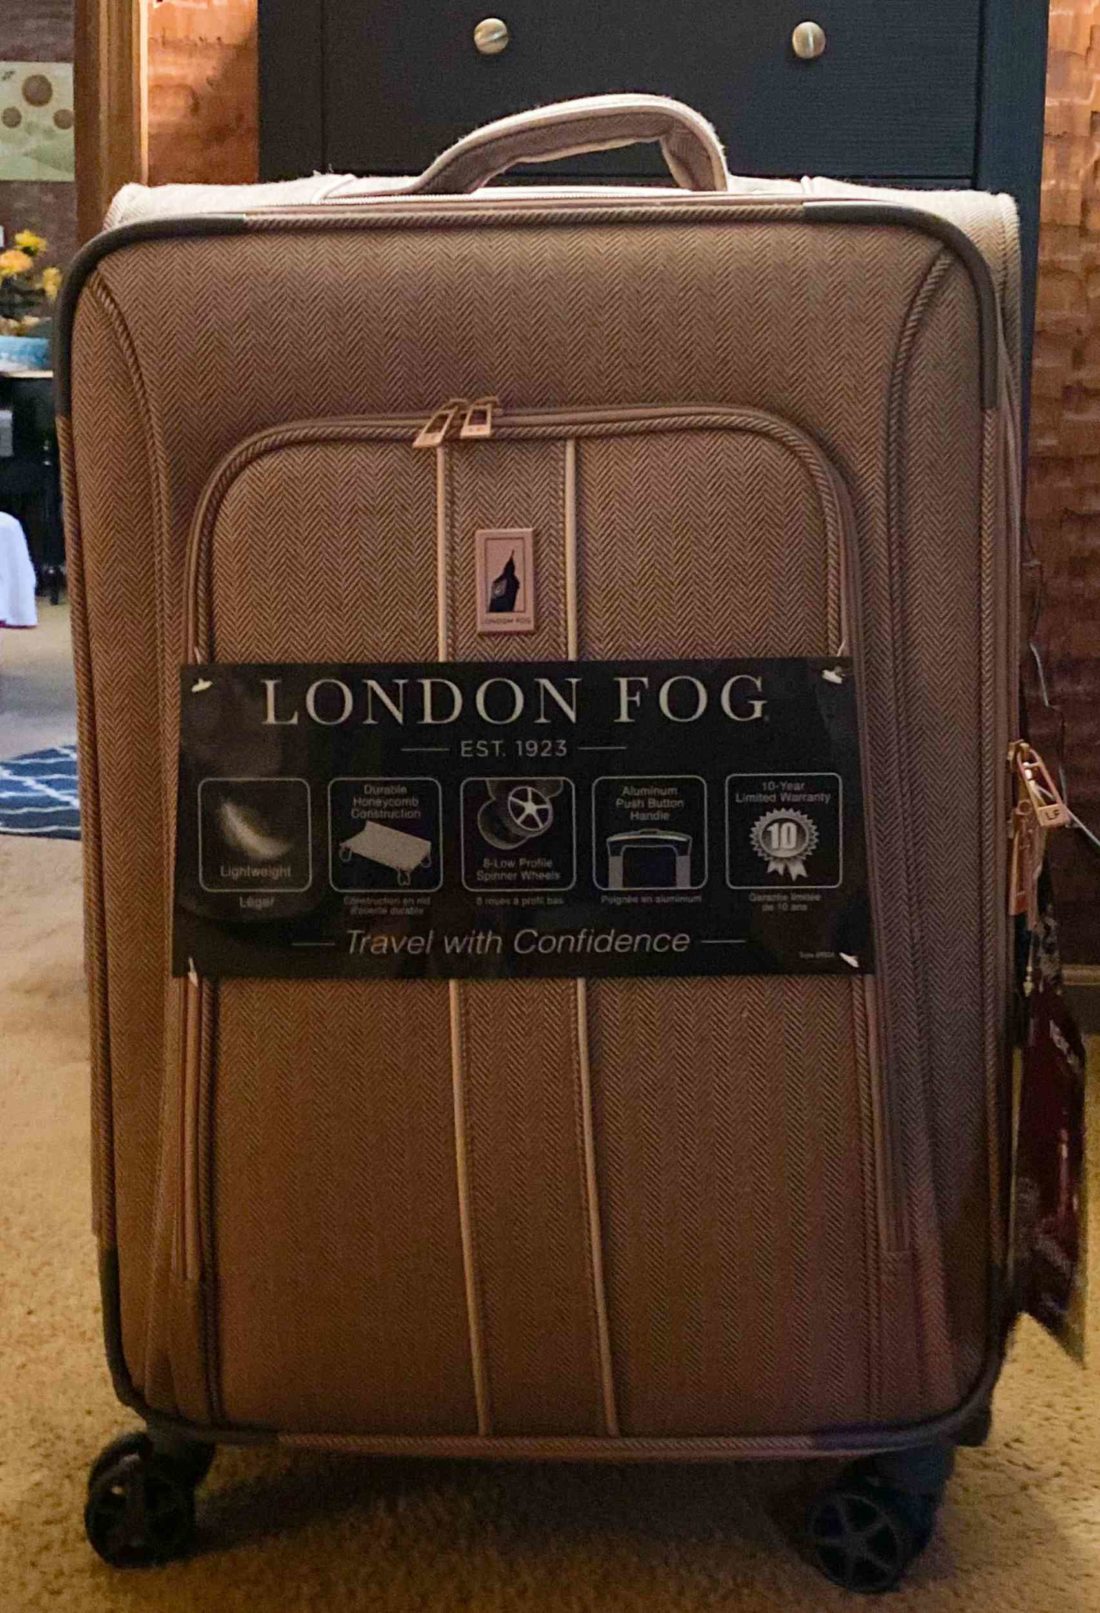 London Fog Suitcase Giveaway